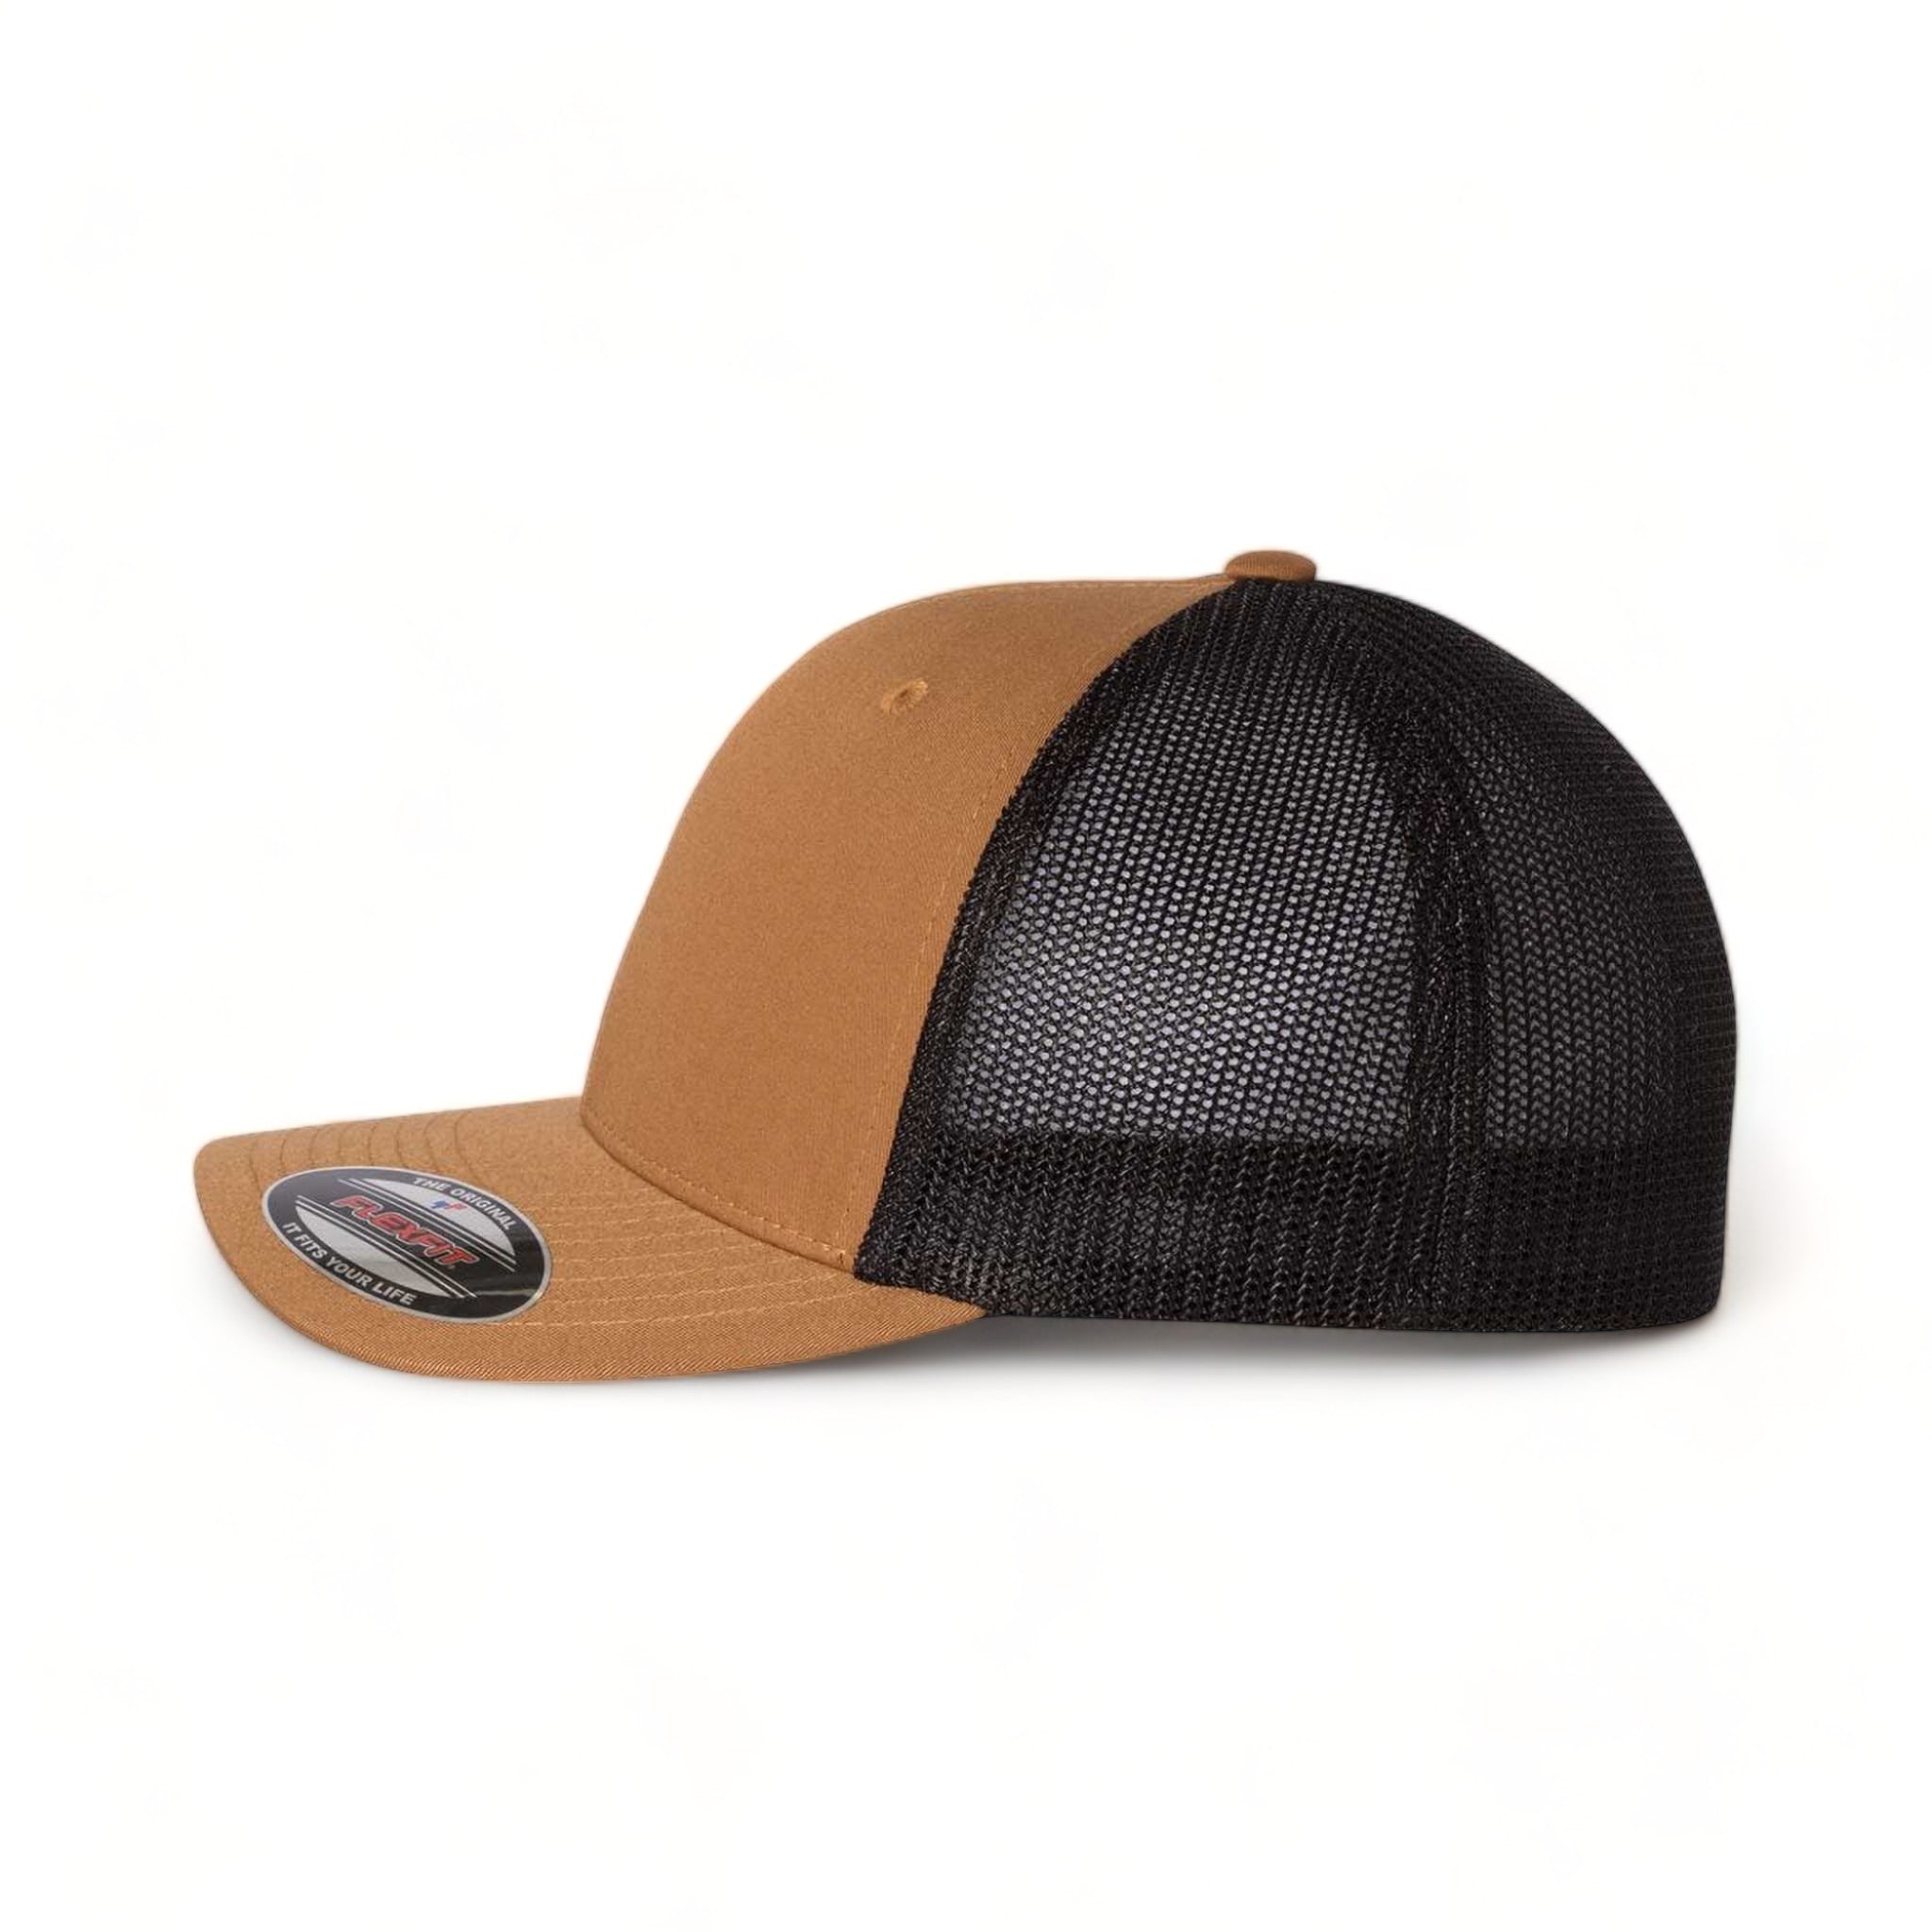 Side view of Flexfit 6511 custom hat in caramel and black